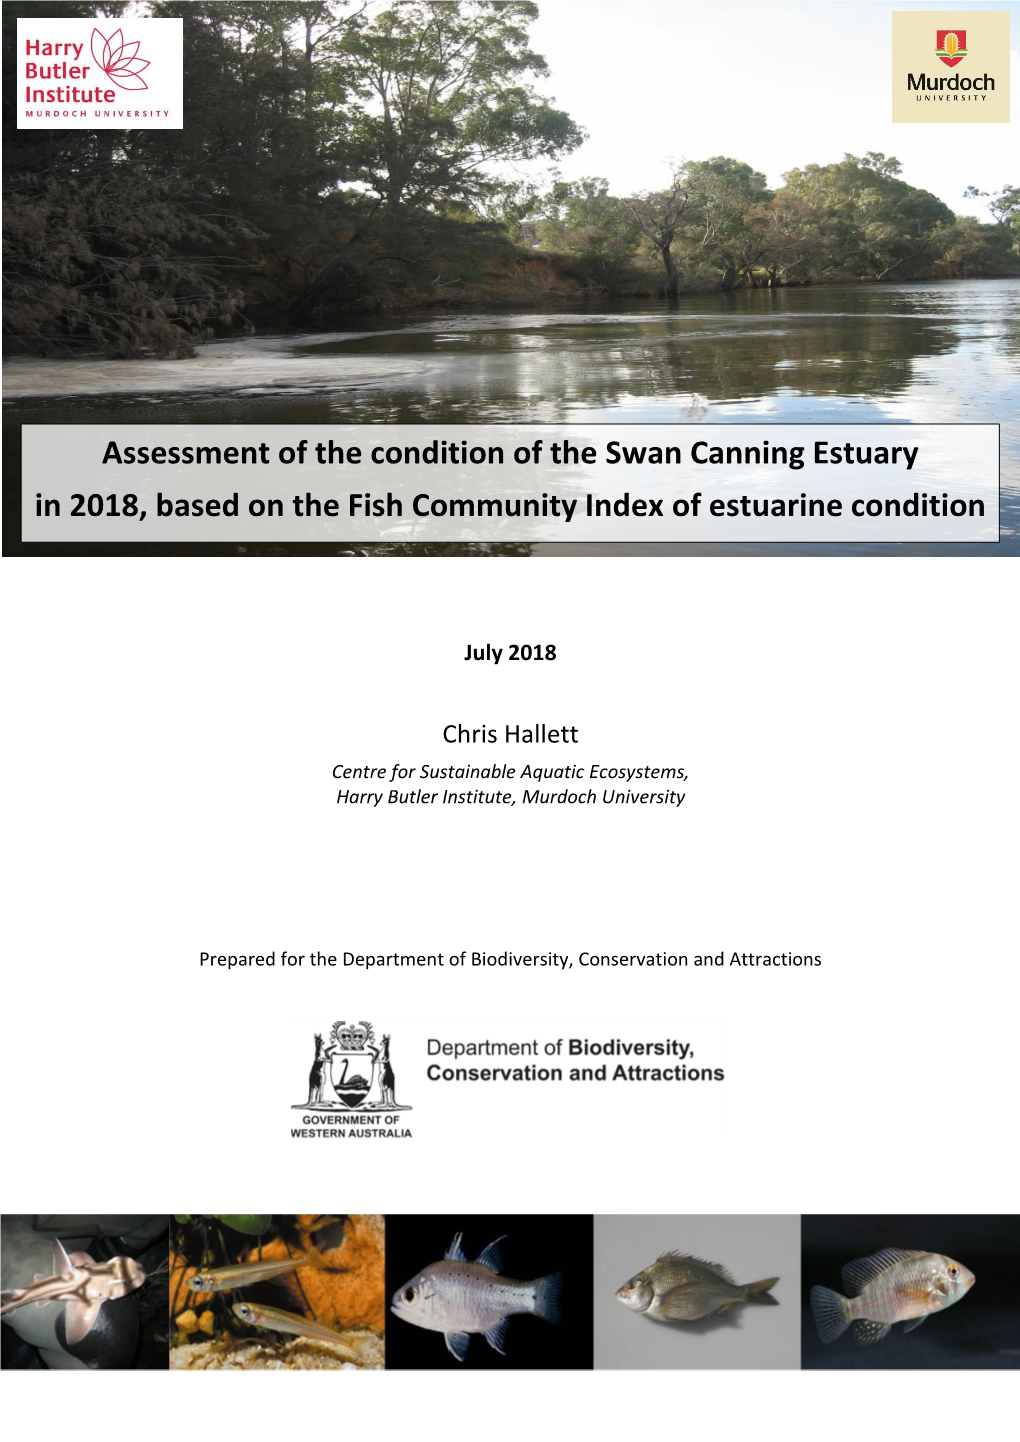 Assessment of the Condition of the Swan Canning Estuary in 2018, Based on the Fish Community Index of Estuarine Condition